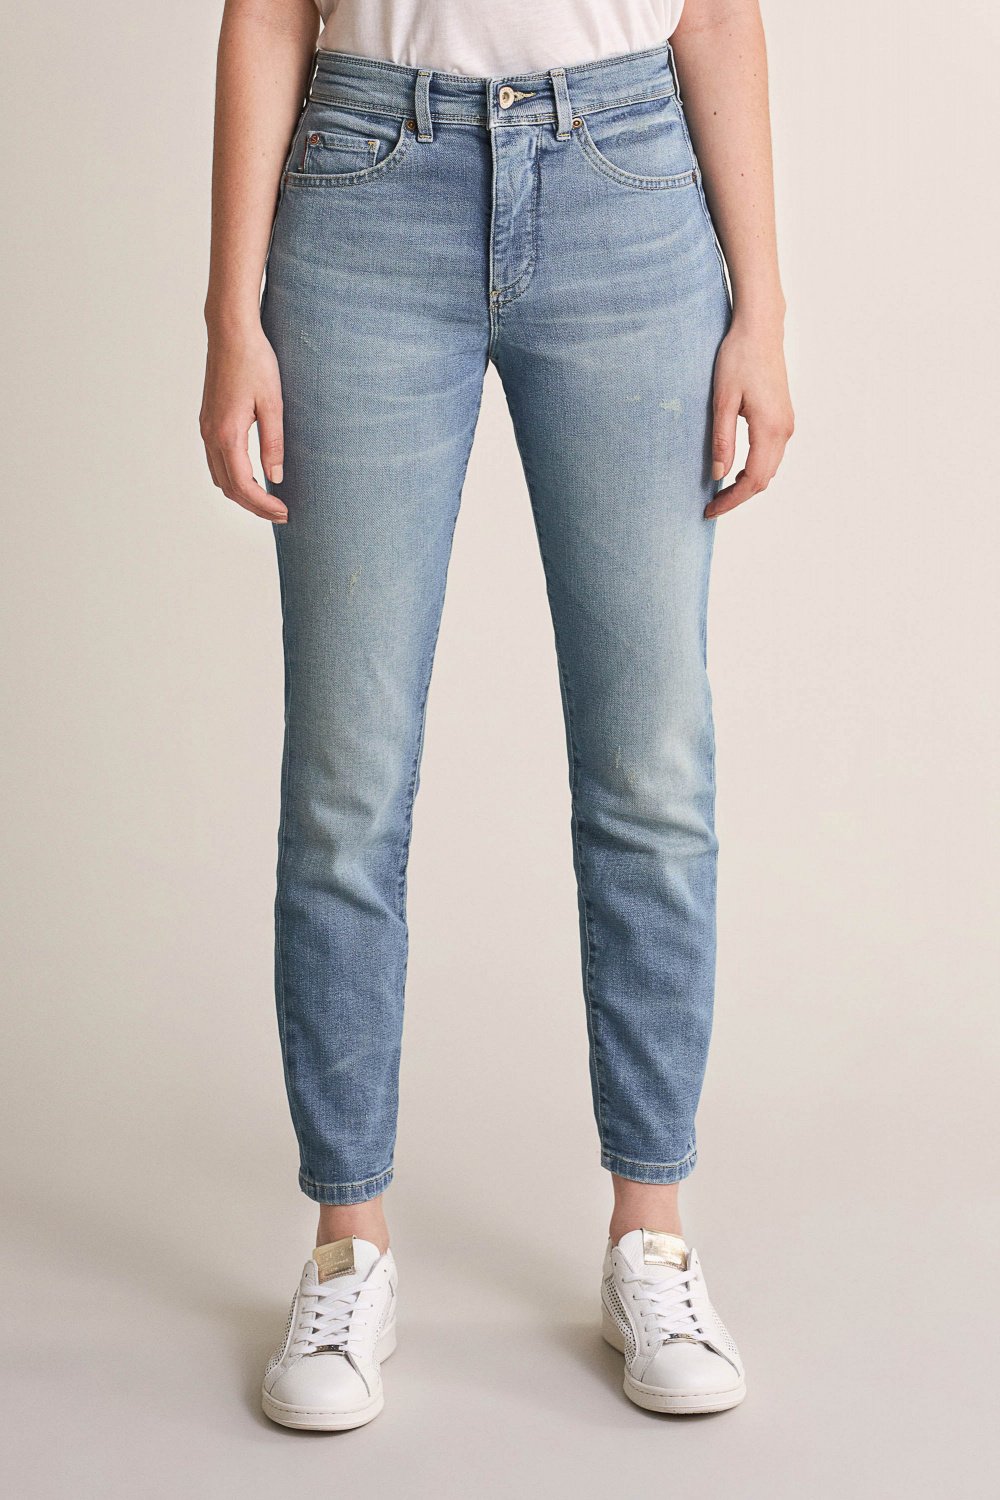 Push In Secret Glamour cropped jeans - Salsa